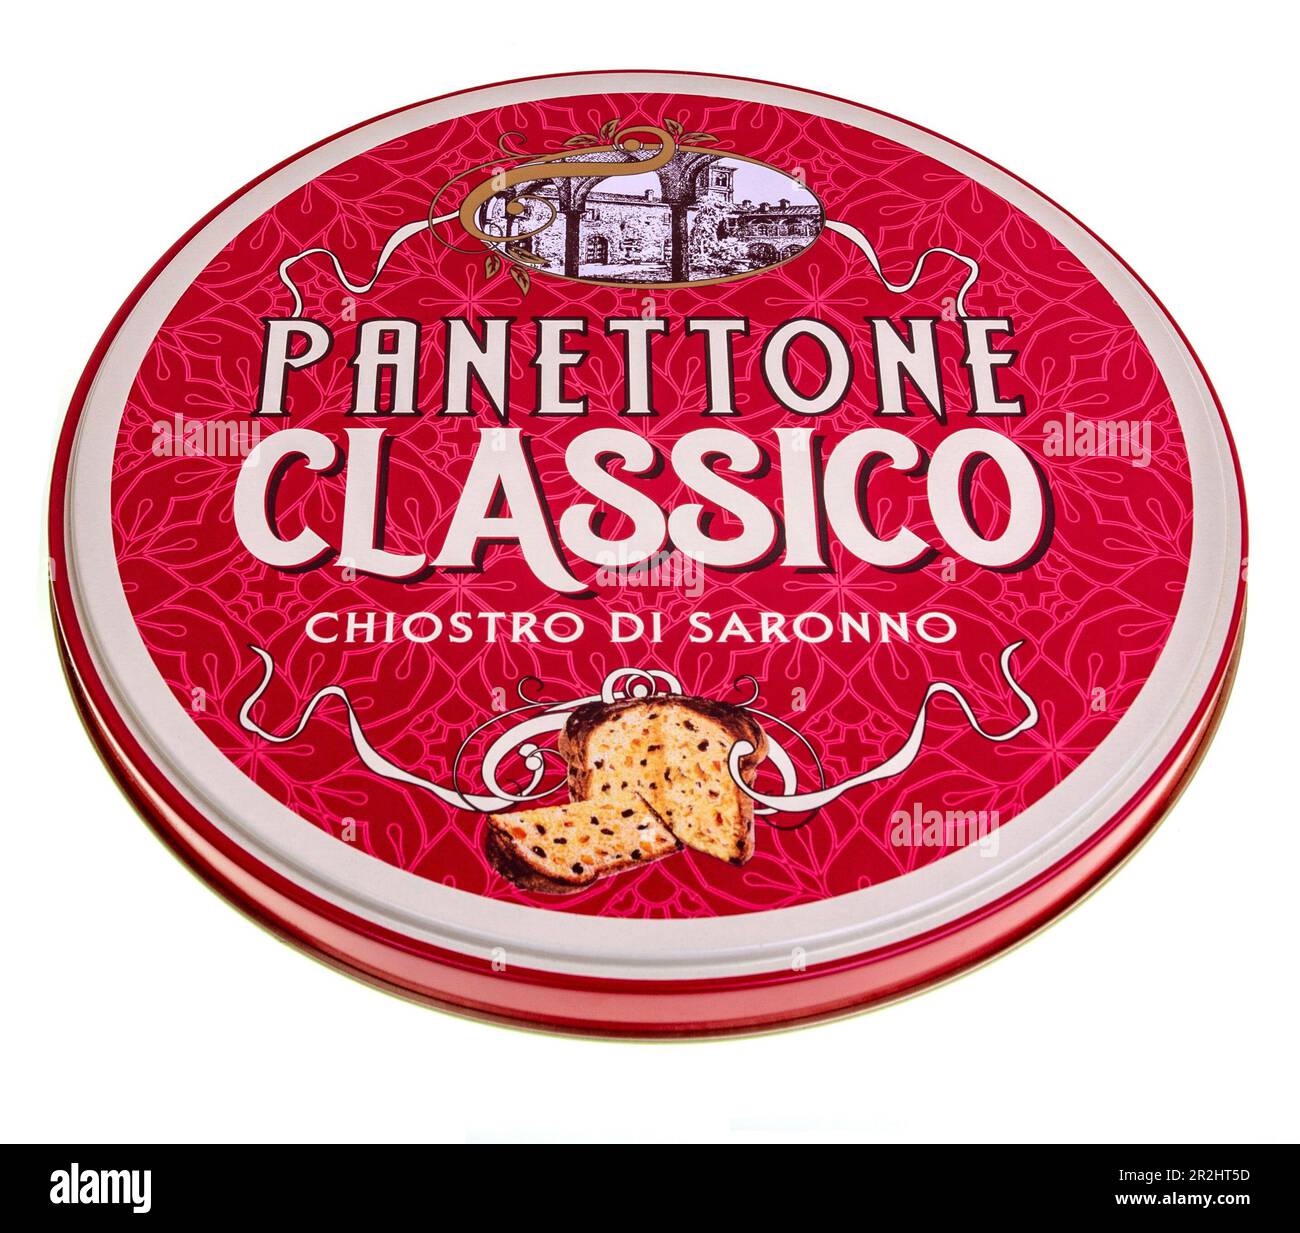 Vintage biscuit tin box with Panettone Classico from Milan made for Chiostro di Saronno Stock Photo